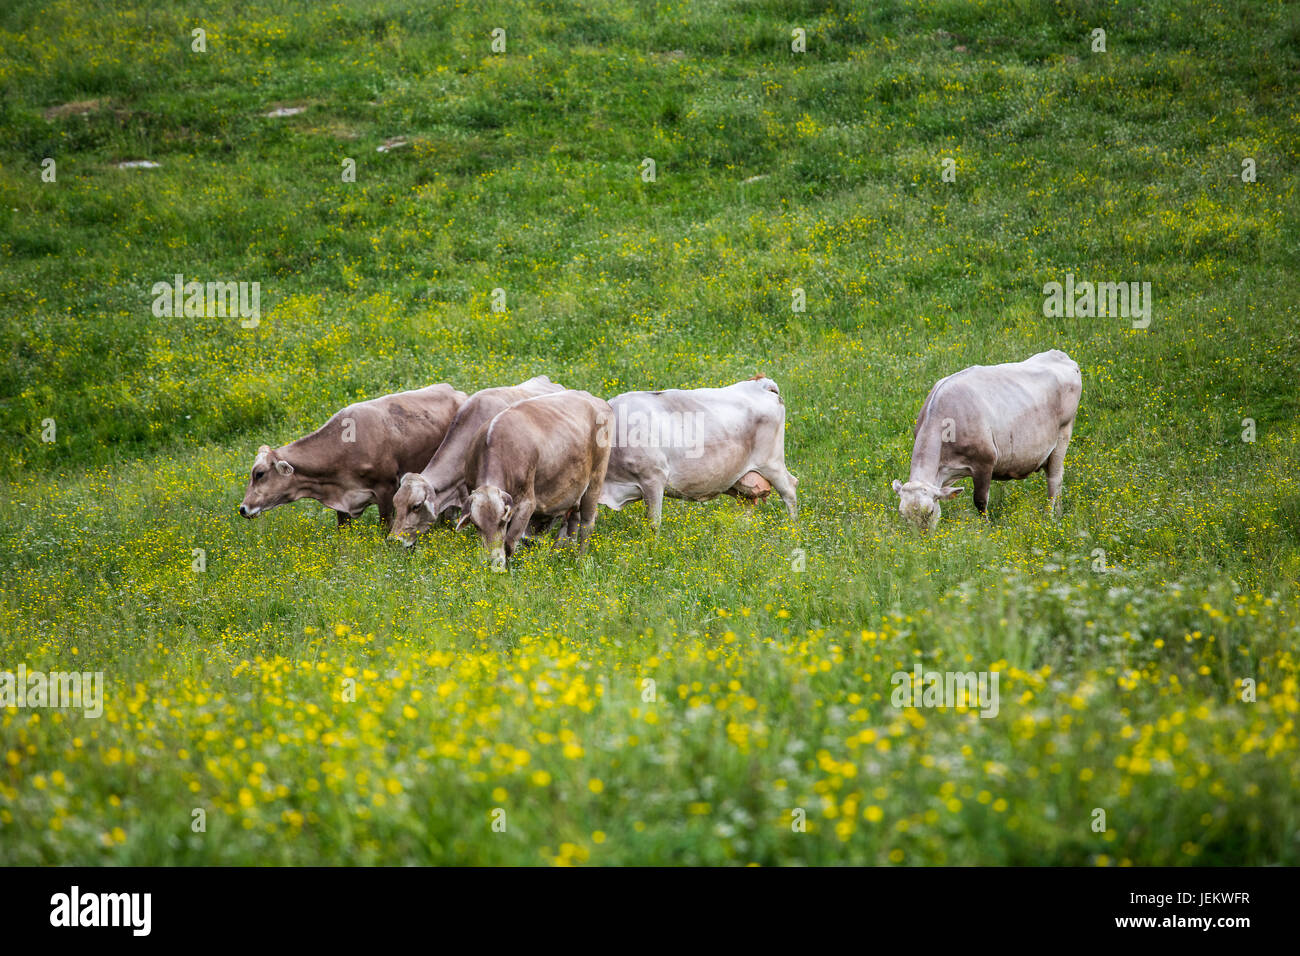 Group of cows (Swiss Braunvieh breed) grazing on a green meadow. Stock Photo